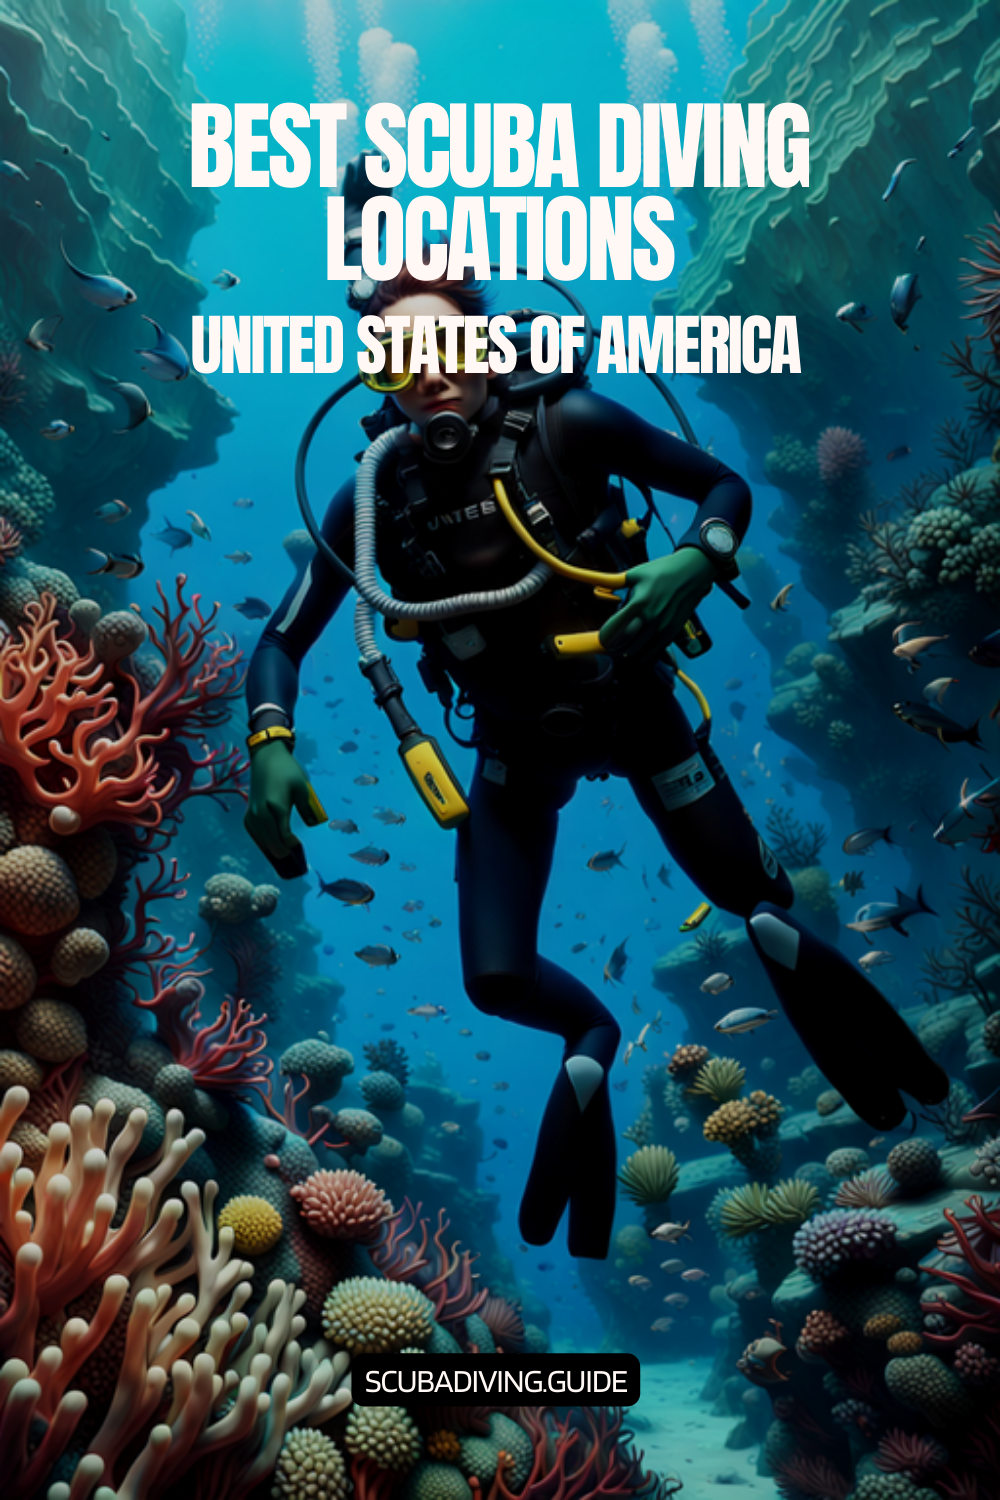 Scuba Diving Locations in United States